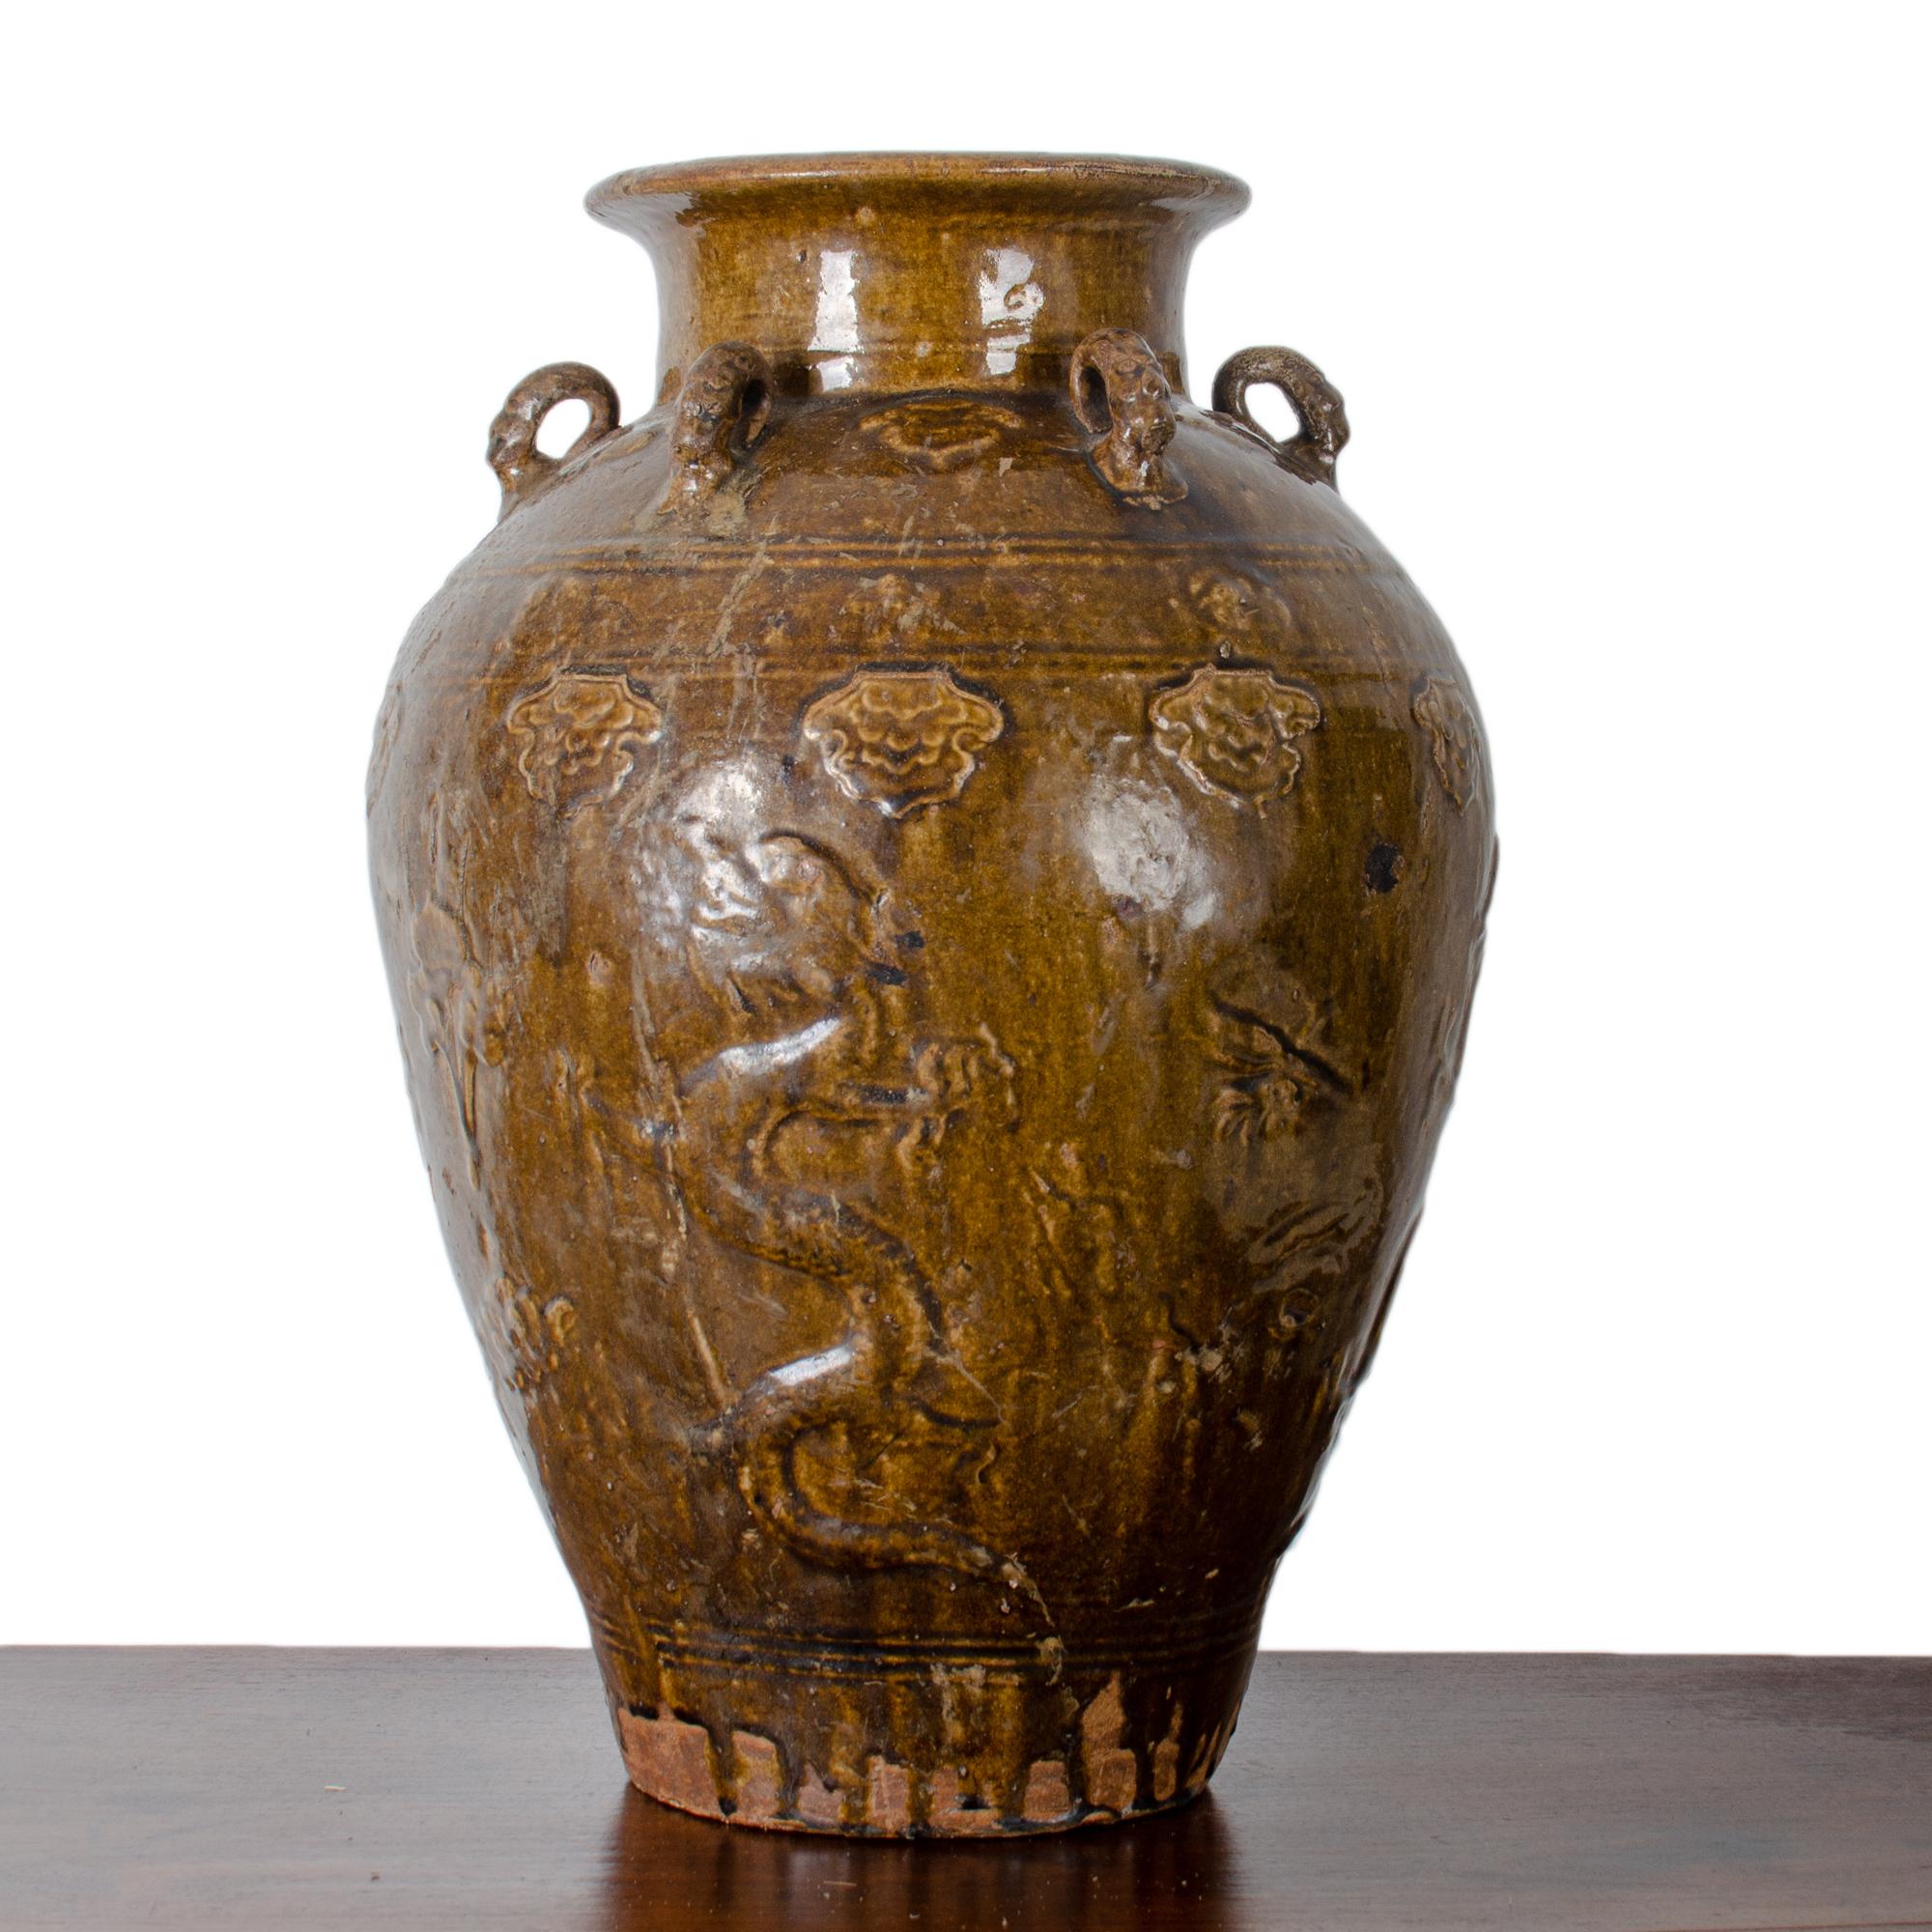 A large brown glazed Martaban storage jar, c. 17th-18th century. 

Tapering ovoid form with molded sides depicting dragons, cranes and floral ornamentation. 

Six dragon head looped straps at shoulder.

22 ¼ inches high by 16 inches wide.

